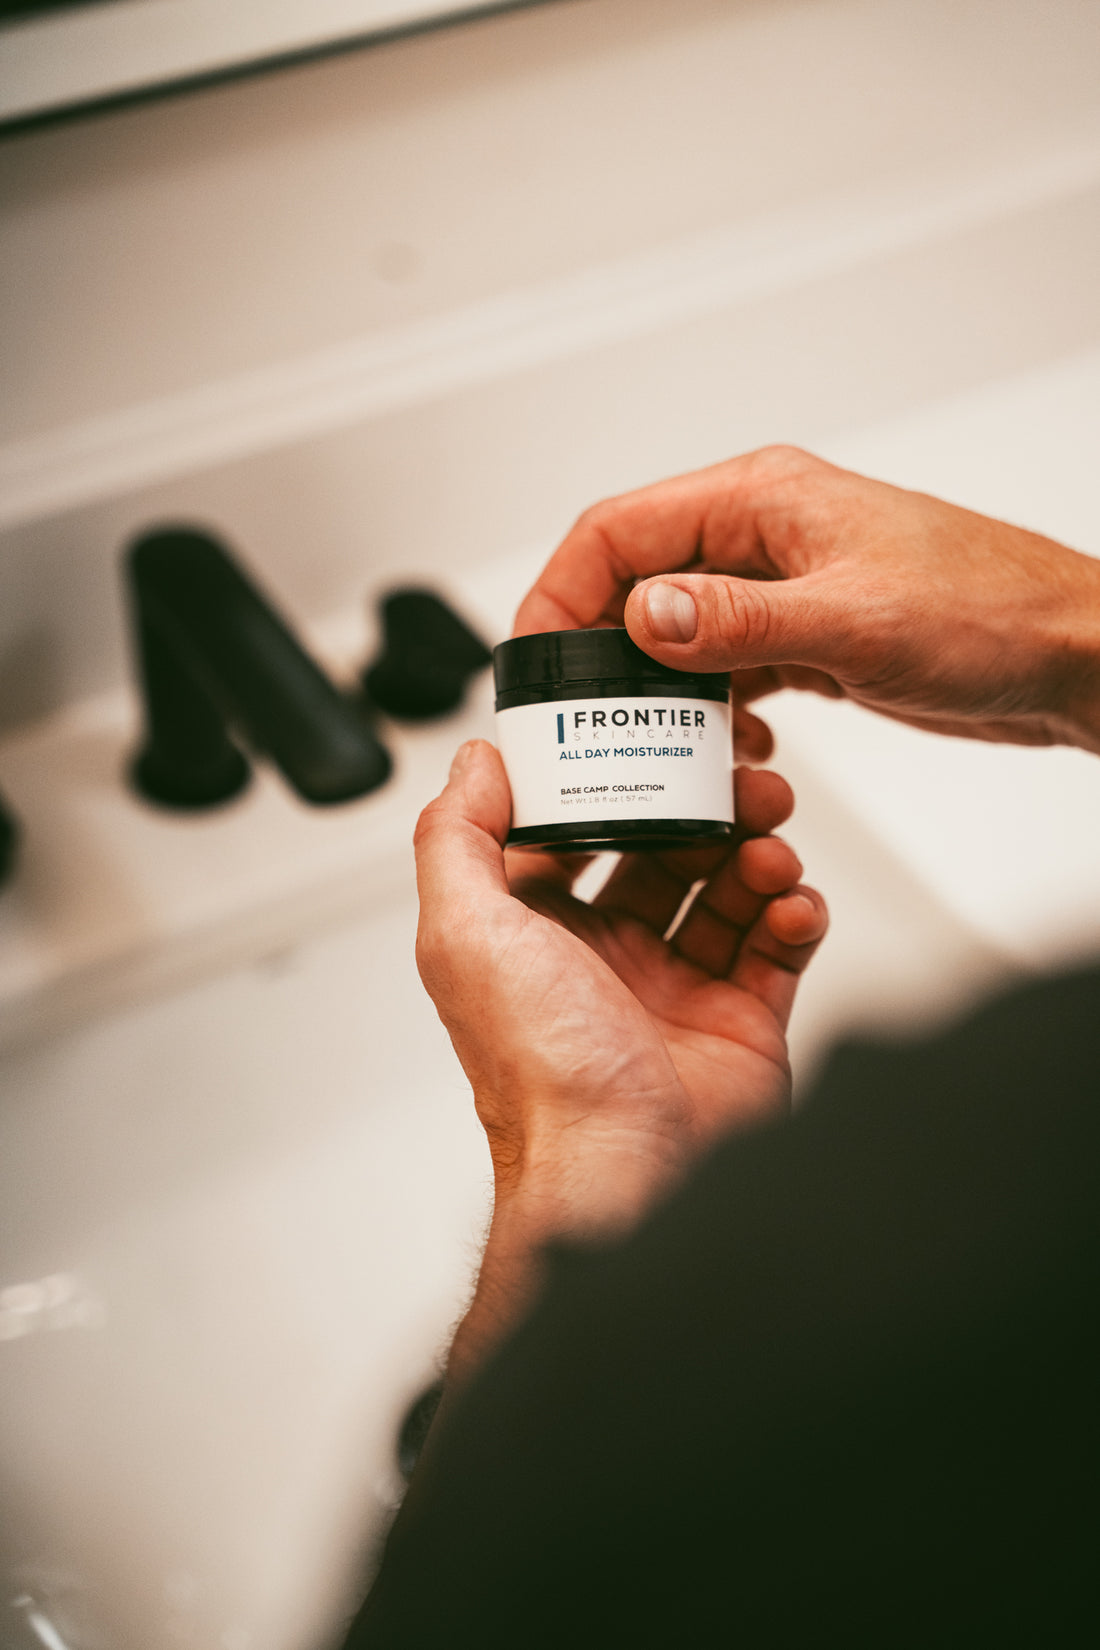  Hands hold a jar of Frontier All Day Moisturizer from their Male Care Collection, ready for use in a skincare routine.